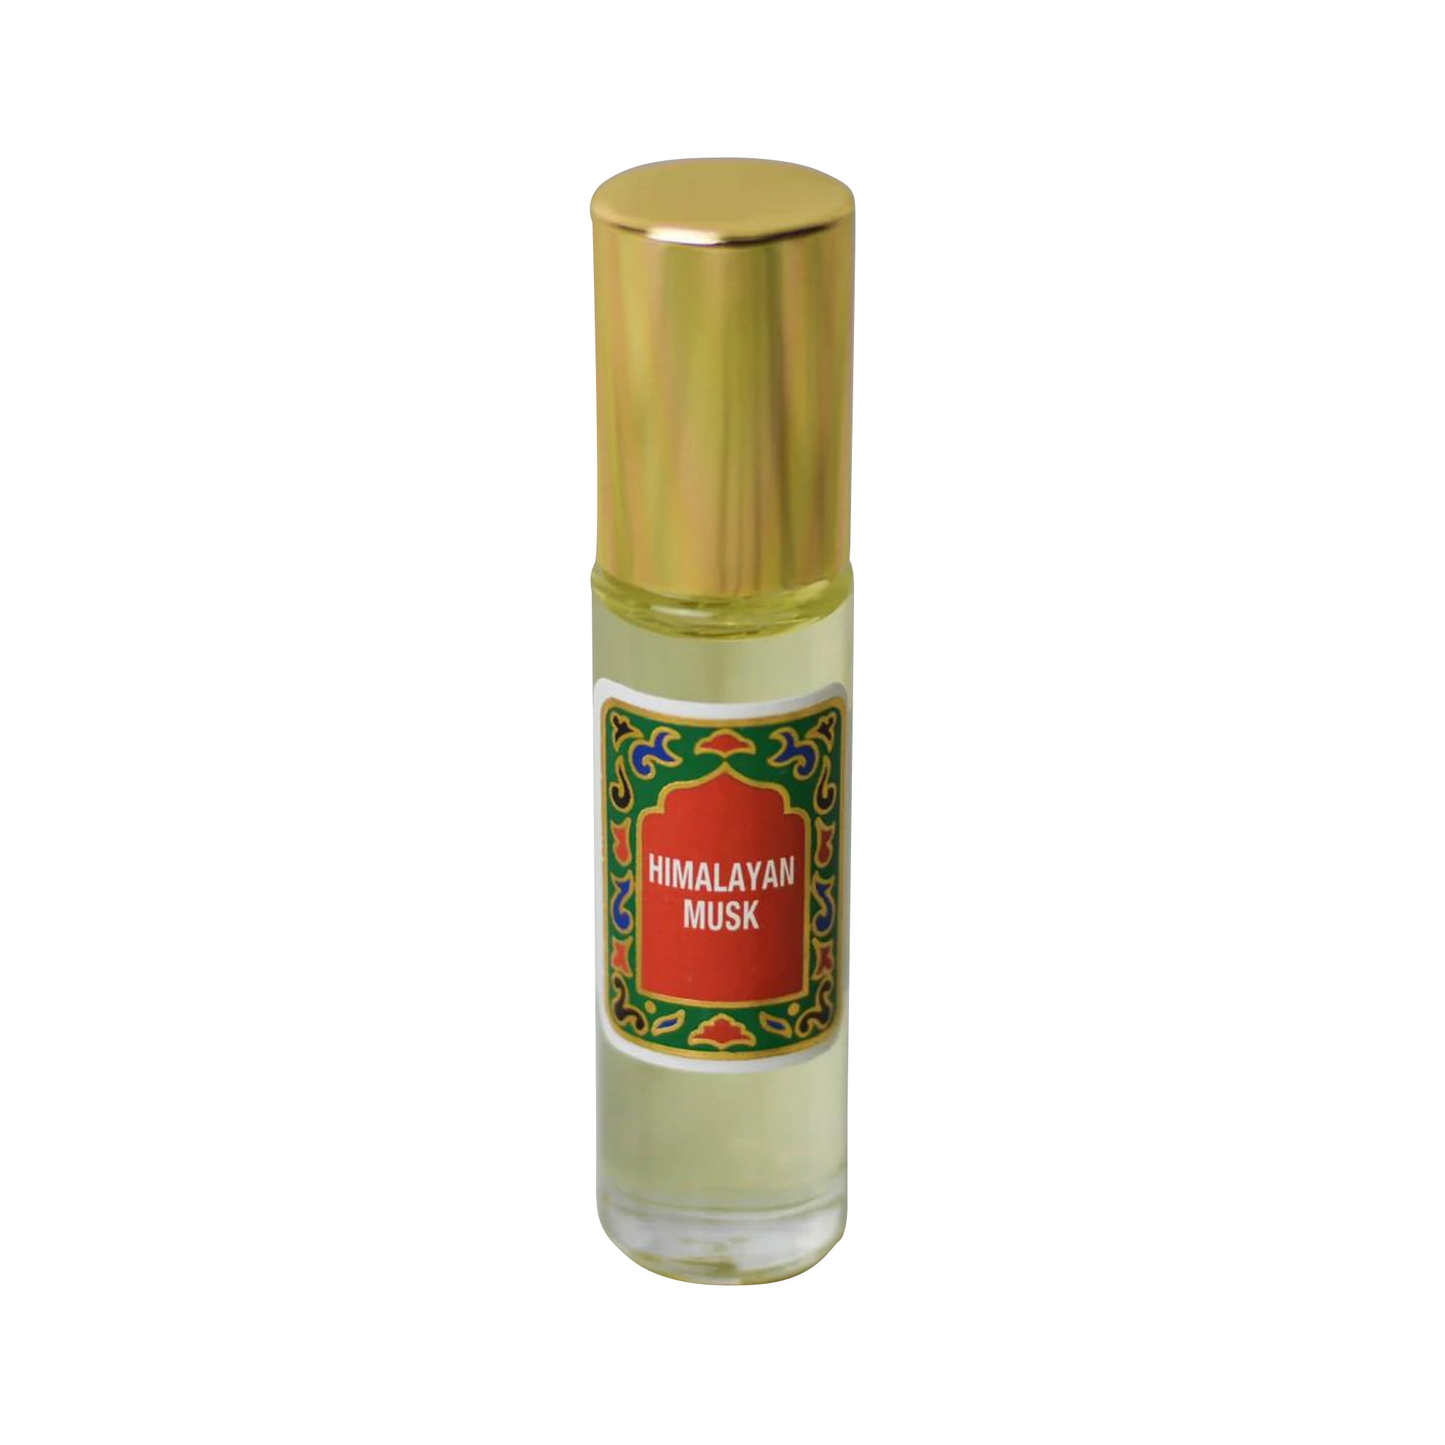 Primary image of Himalayan Musk Fragrance Roll-On